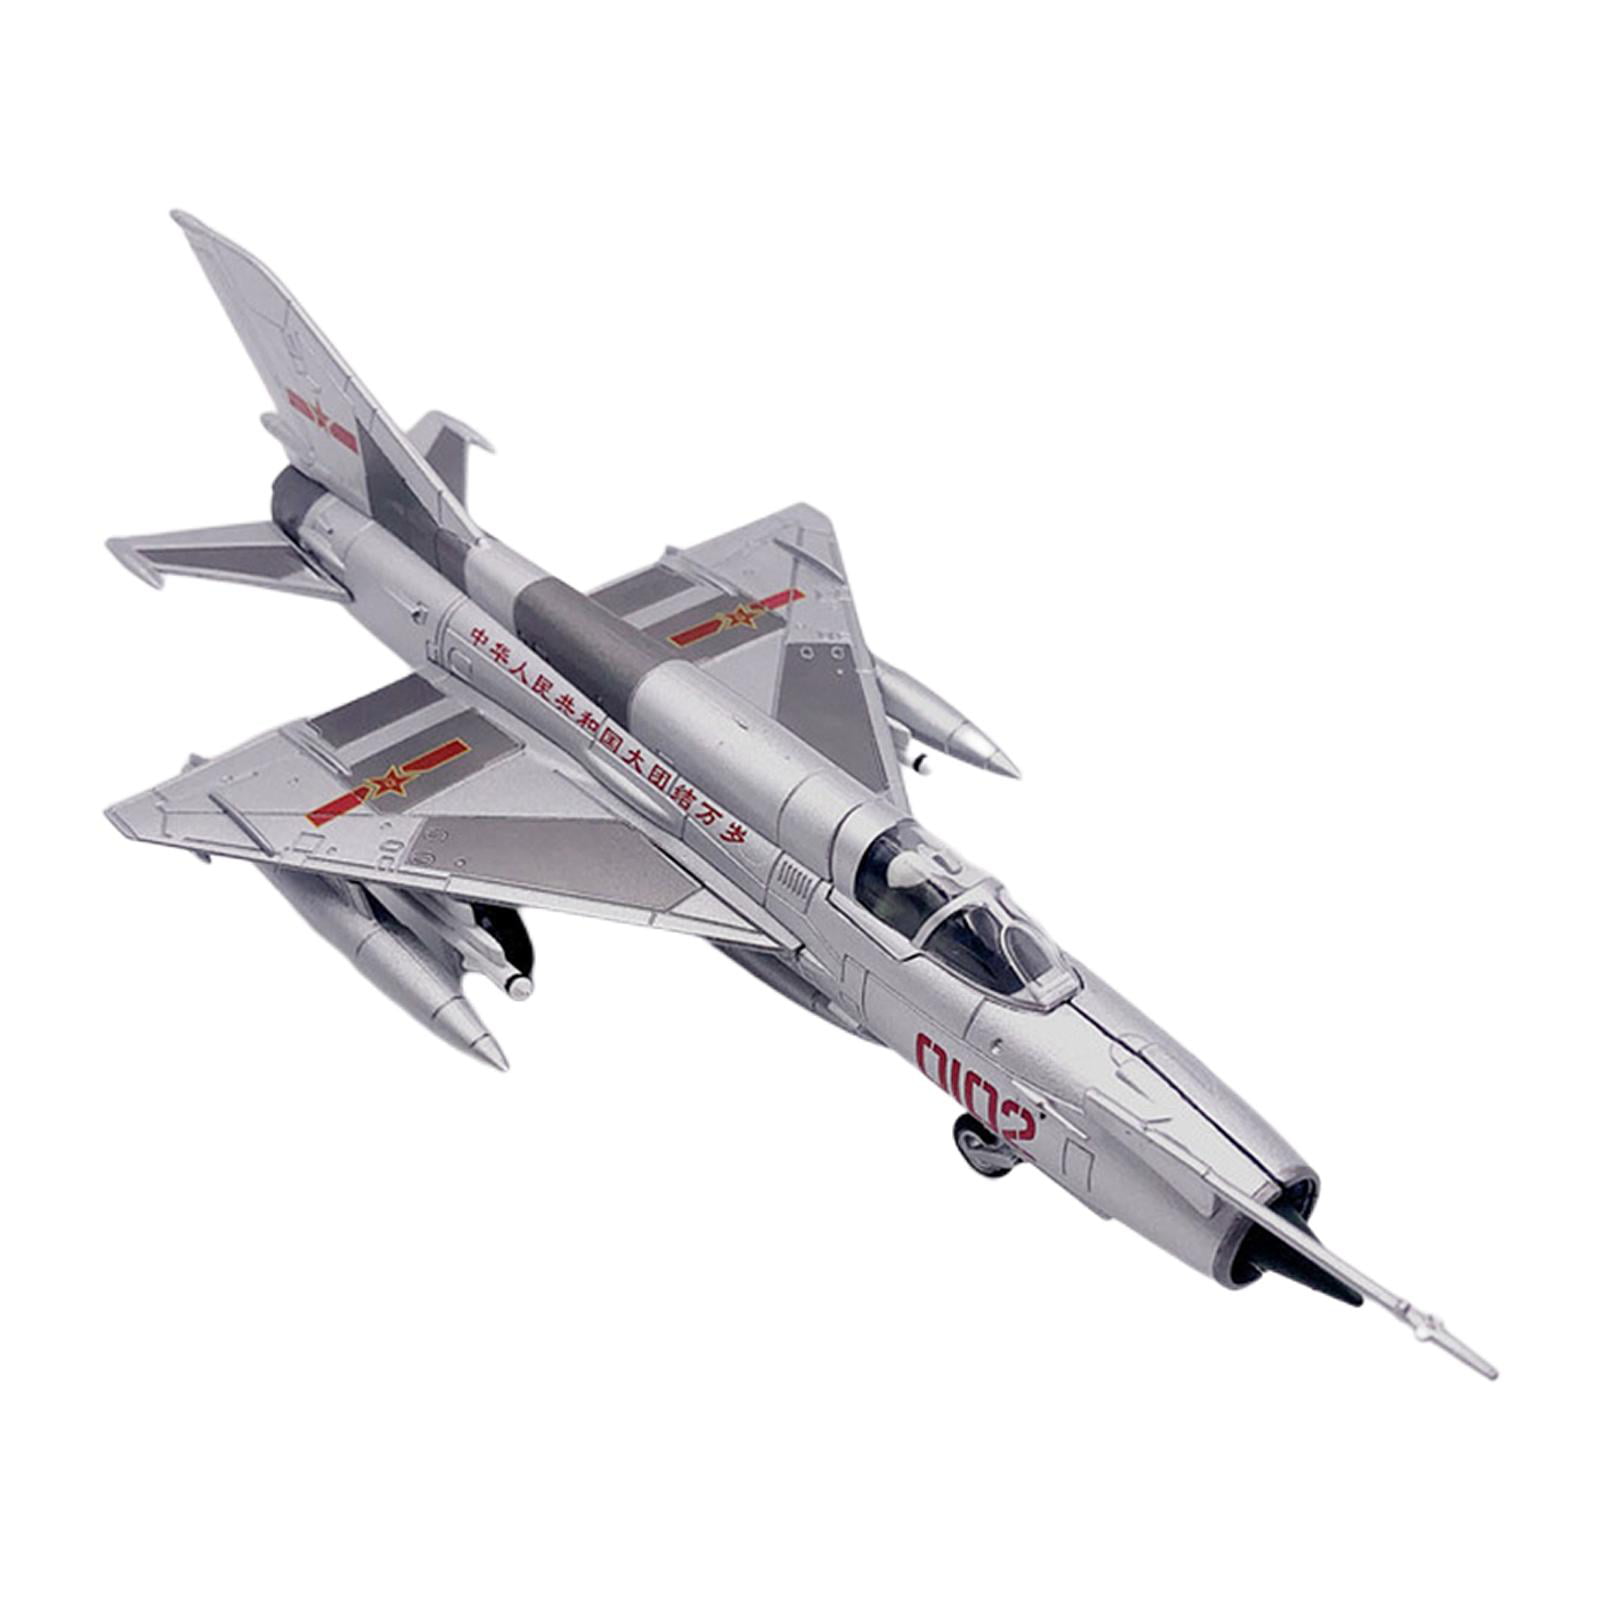 MIG-21 Fighter Aircraft Model 1:72 Scale Aolly Diecast Military Toy Gift 